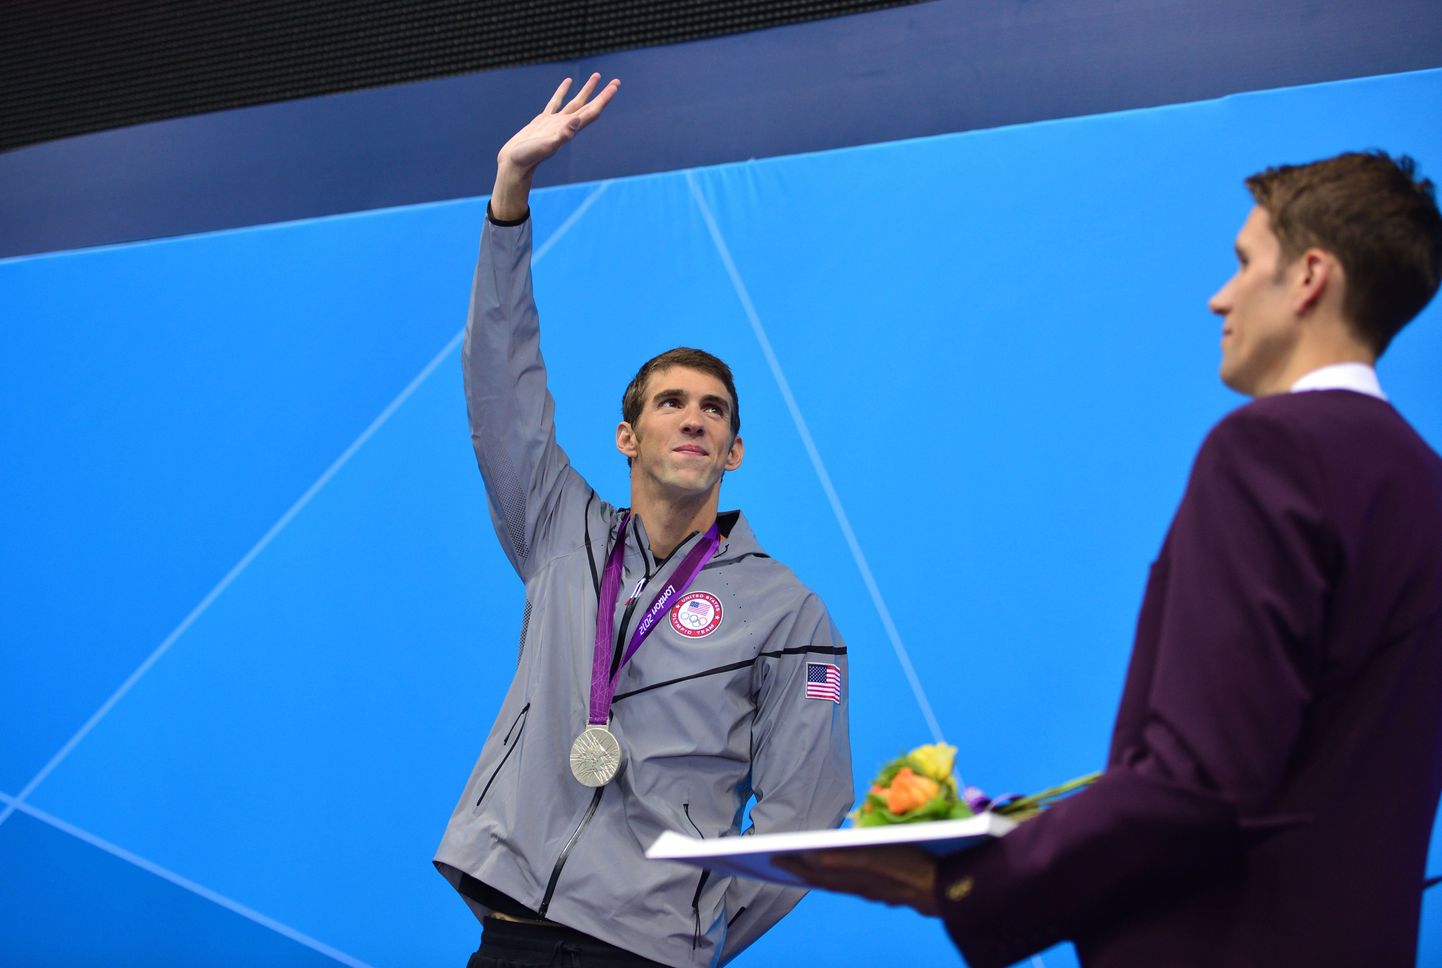 US swimmer Michael Phelps  poses on the podium after winning silver in the men's 200m butterfly final during the swimming event at the London 2012 Olympic Games on July 31, 2012 in London.  AFP PHOTO / FABRICE COFFRINI